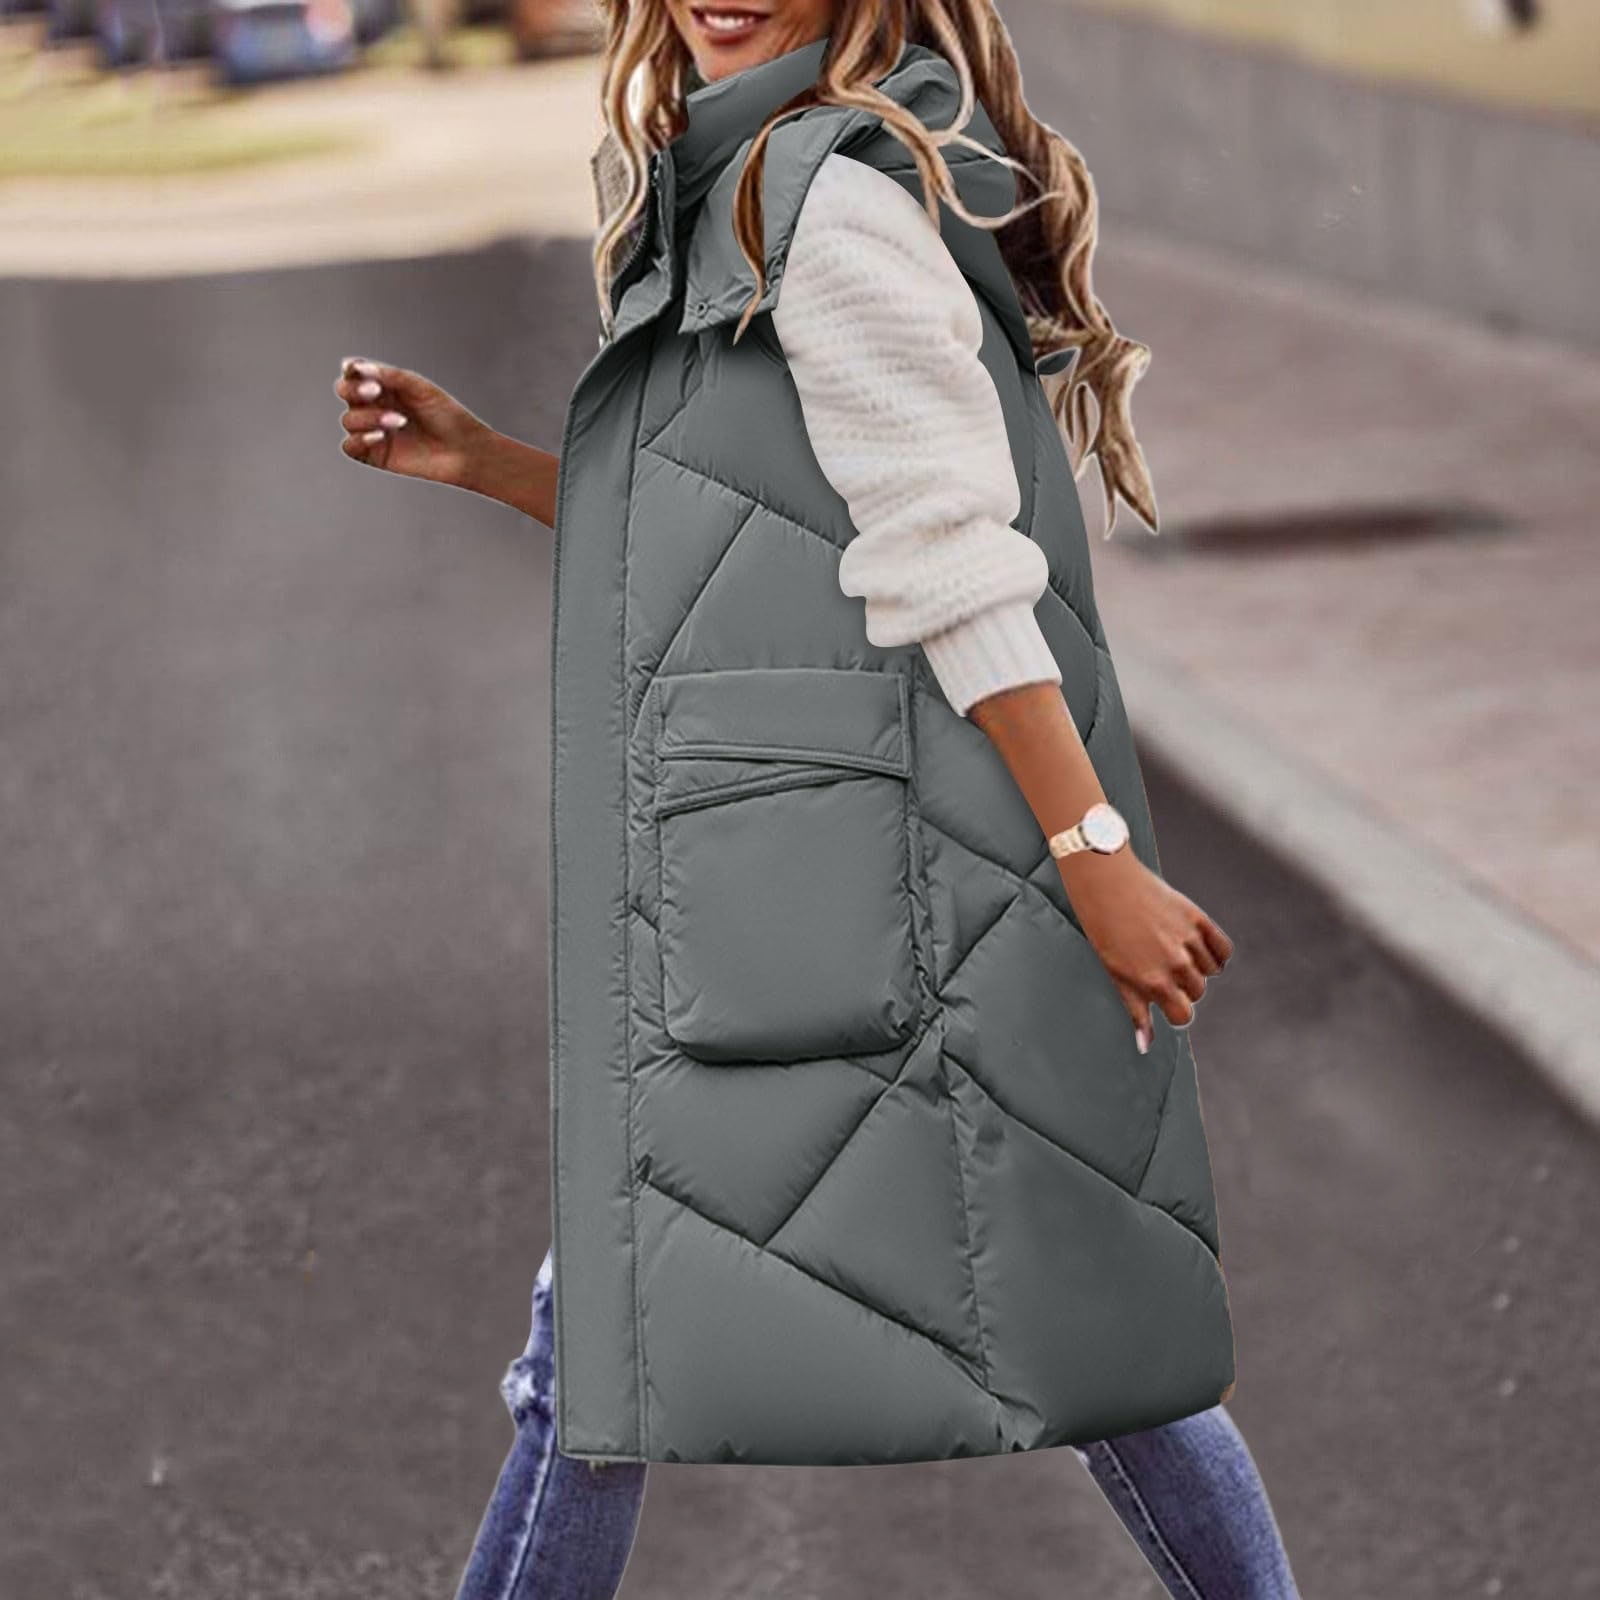 Long Puffer Vest Women, Ladies Zip Up Down Jacket with Detachable Hood  Stand Collar Sleeveless Thick Winter Coats (3X-Large, Gray)